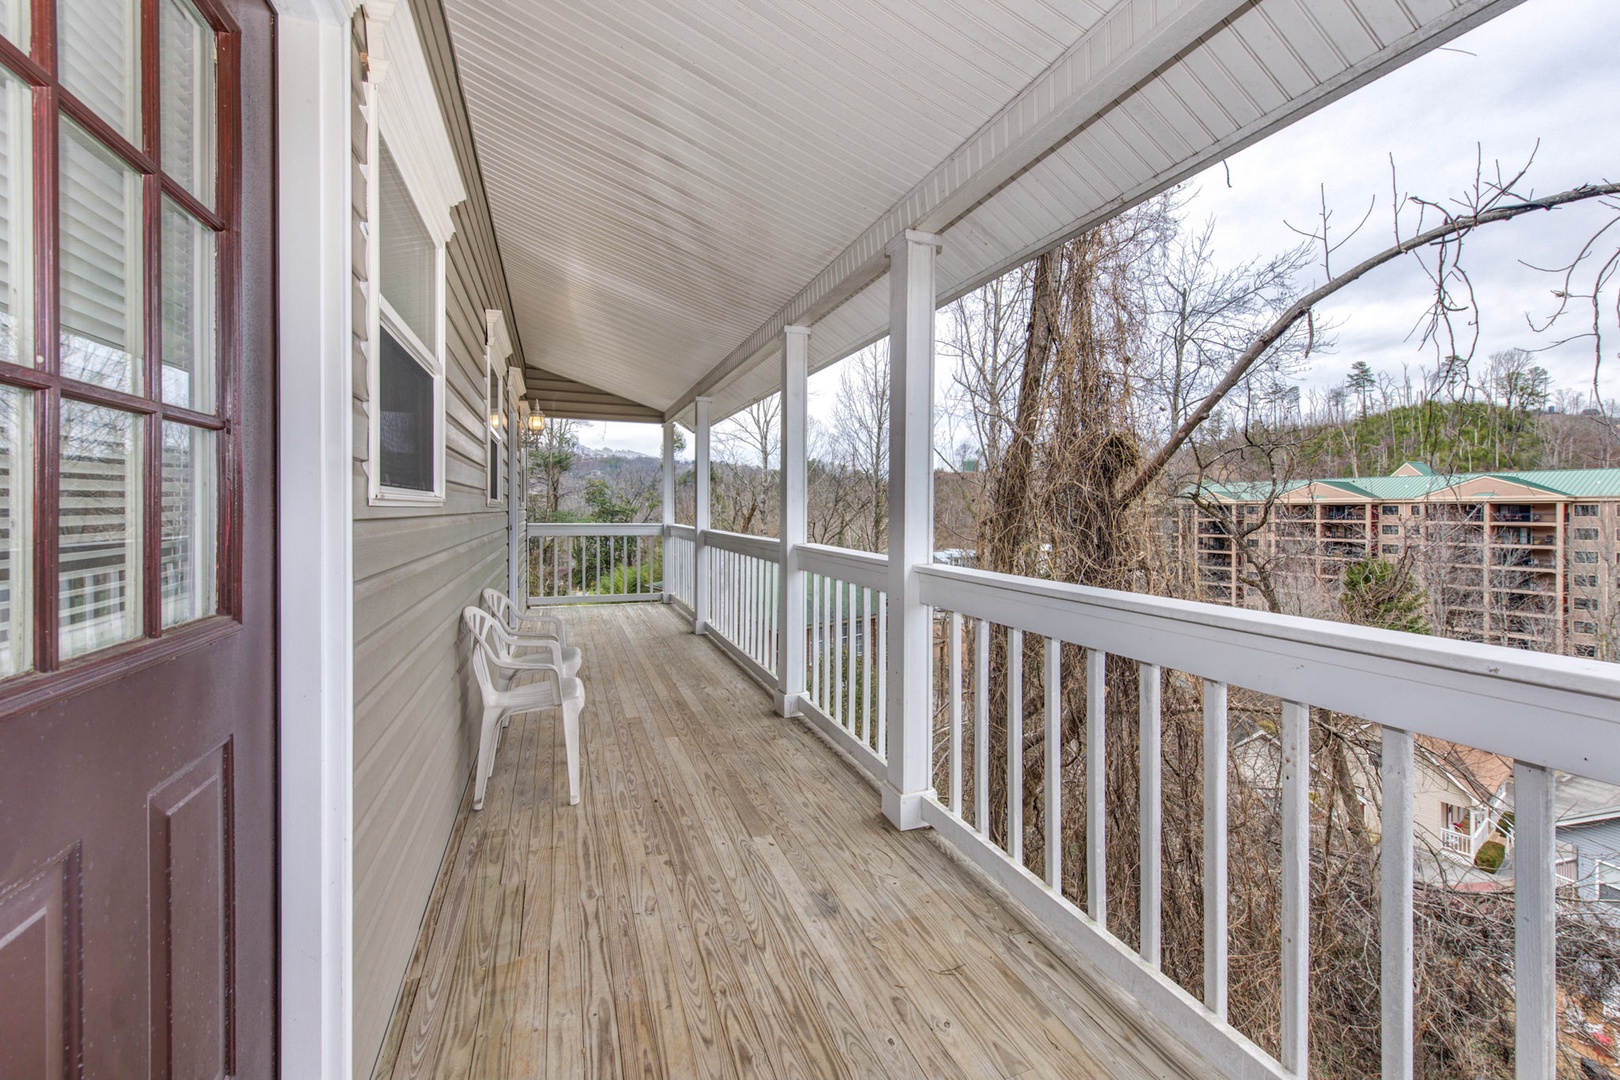 Lounge the day away or dine with tranquil views on the multi-level back deck